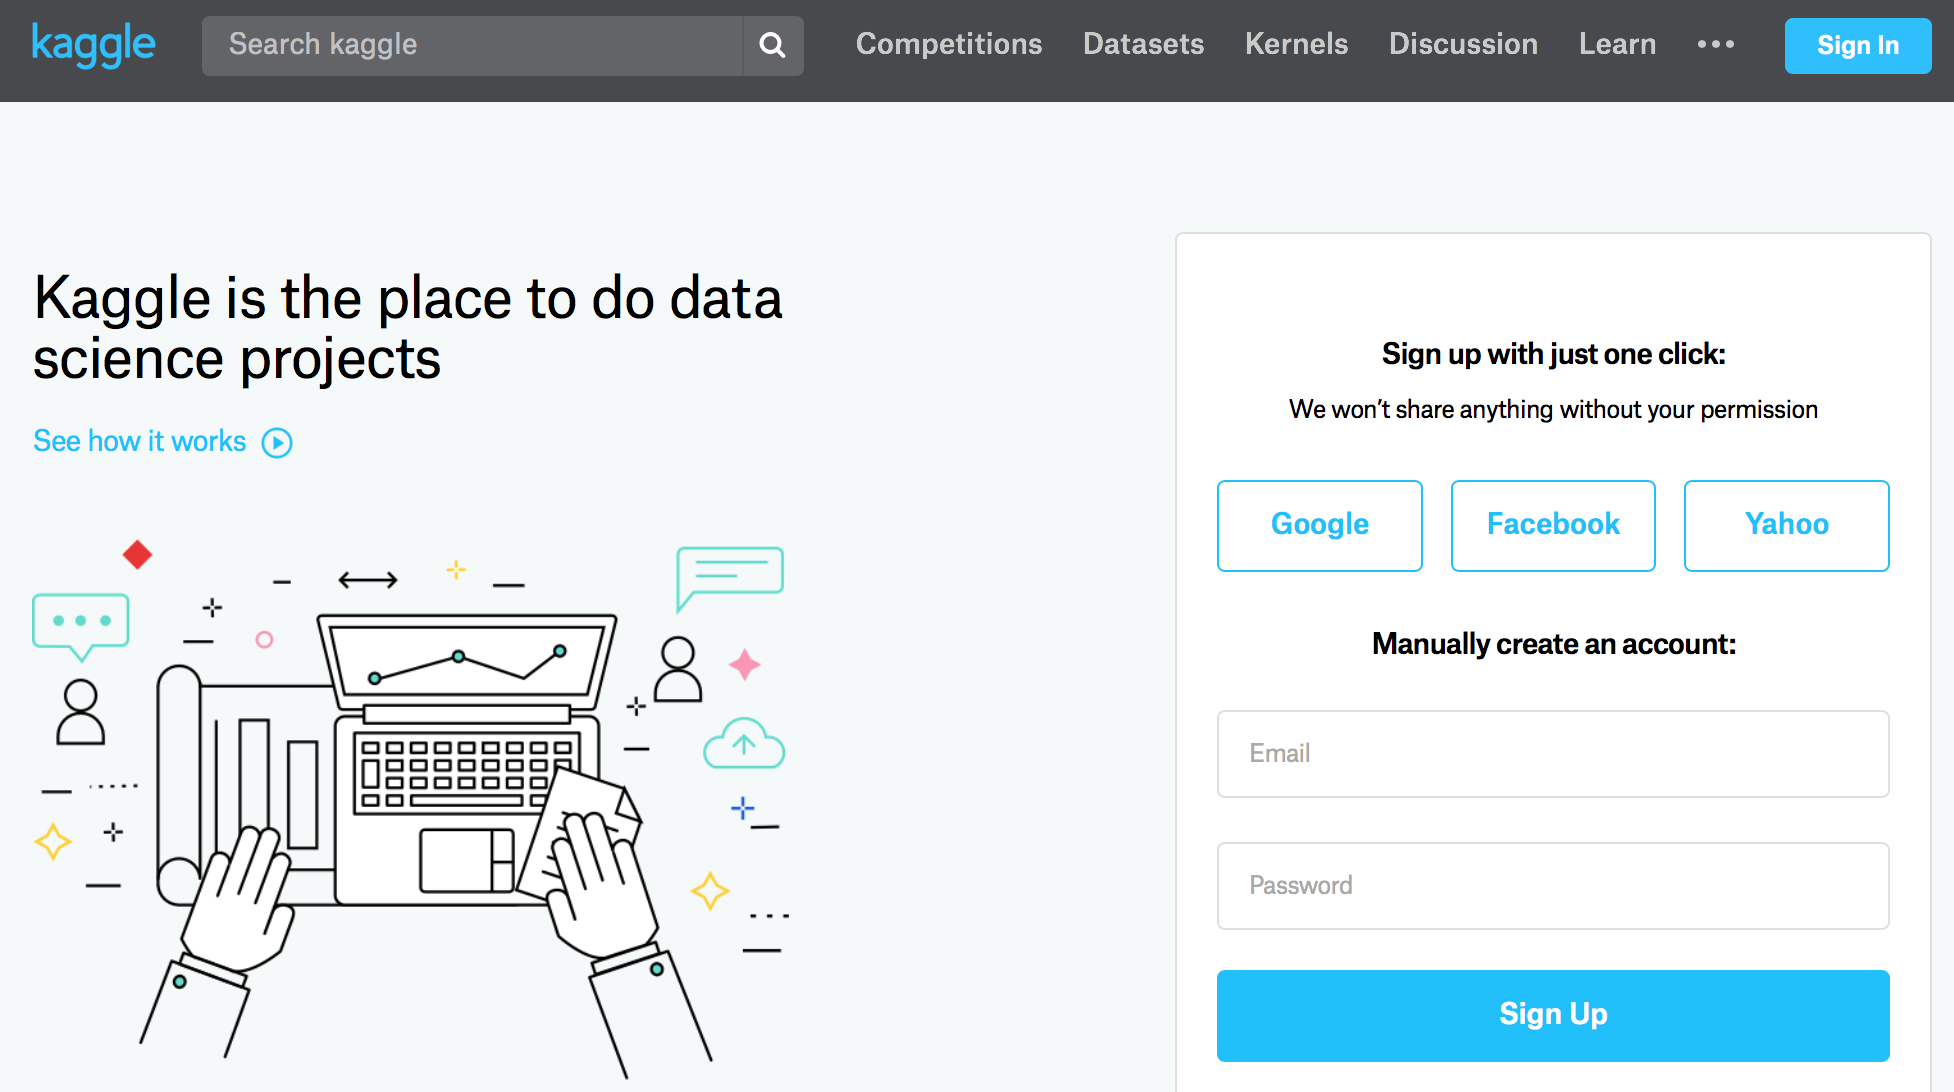 Kaggle user sign-up form